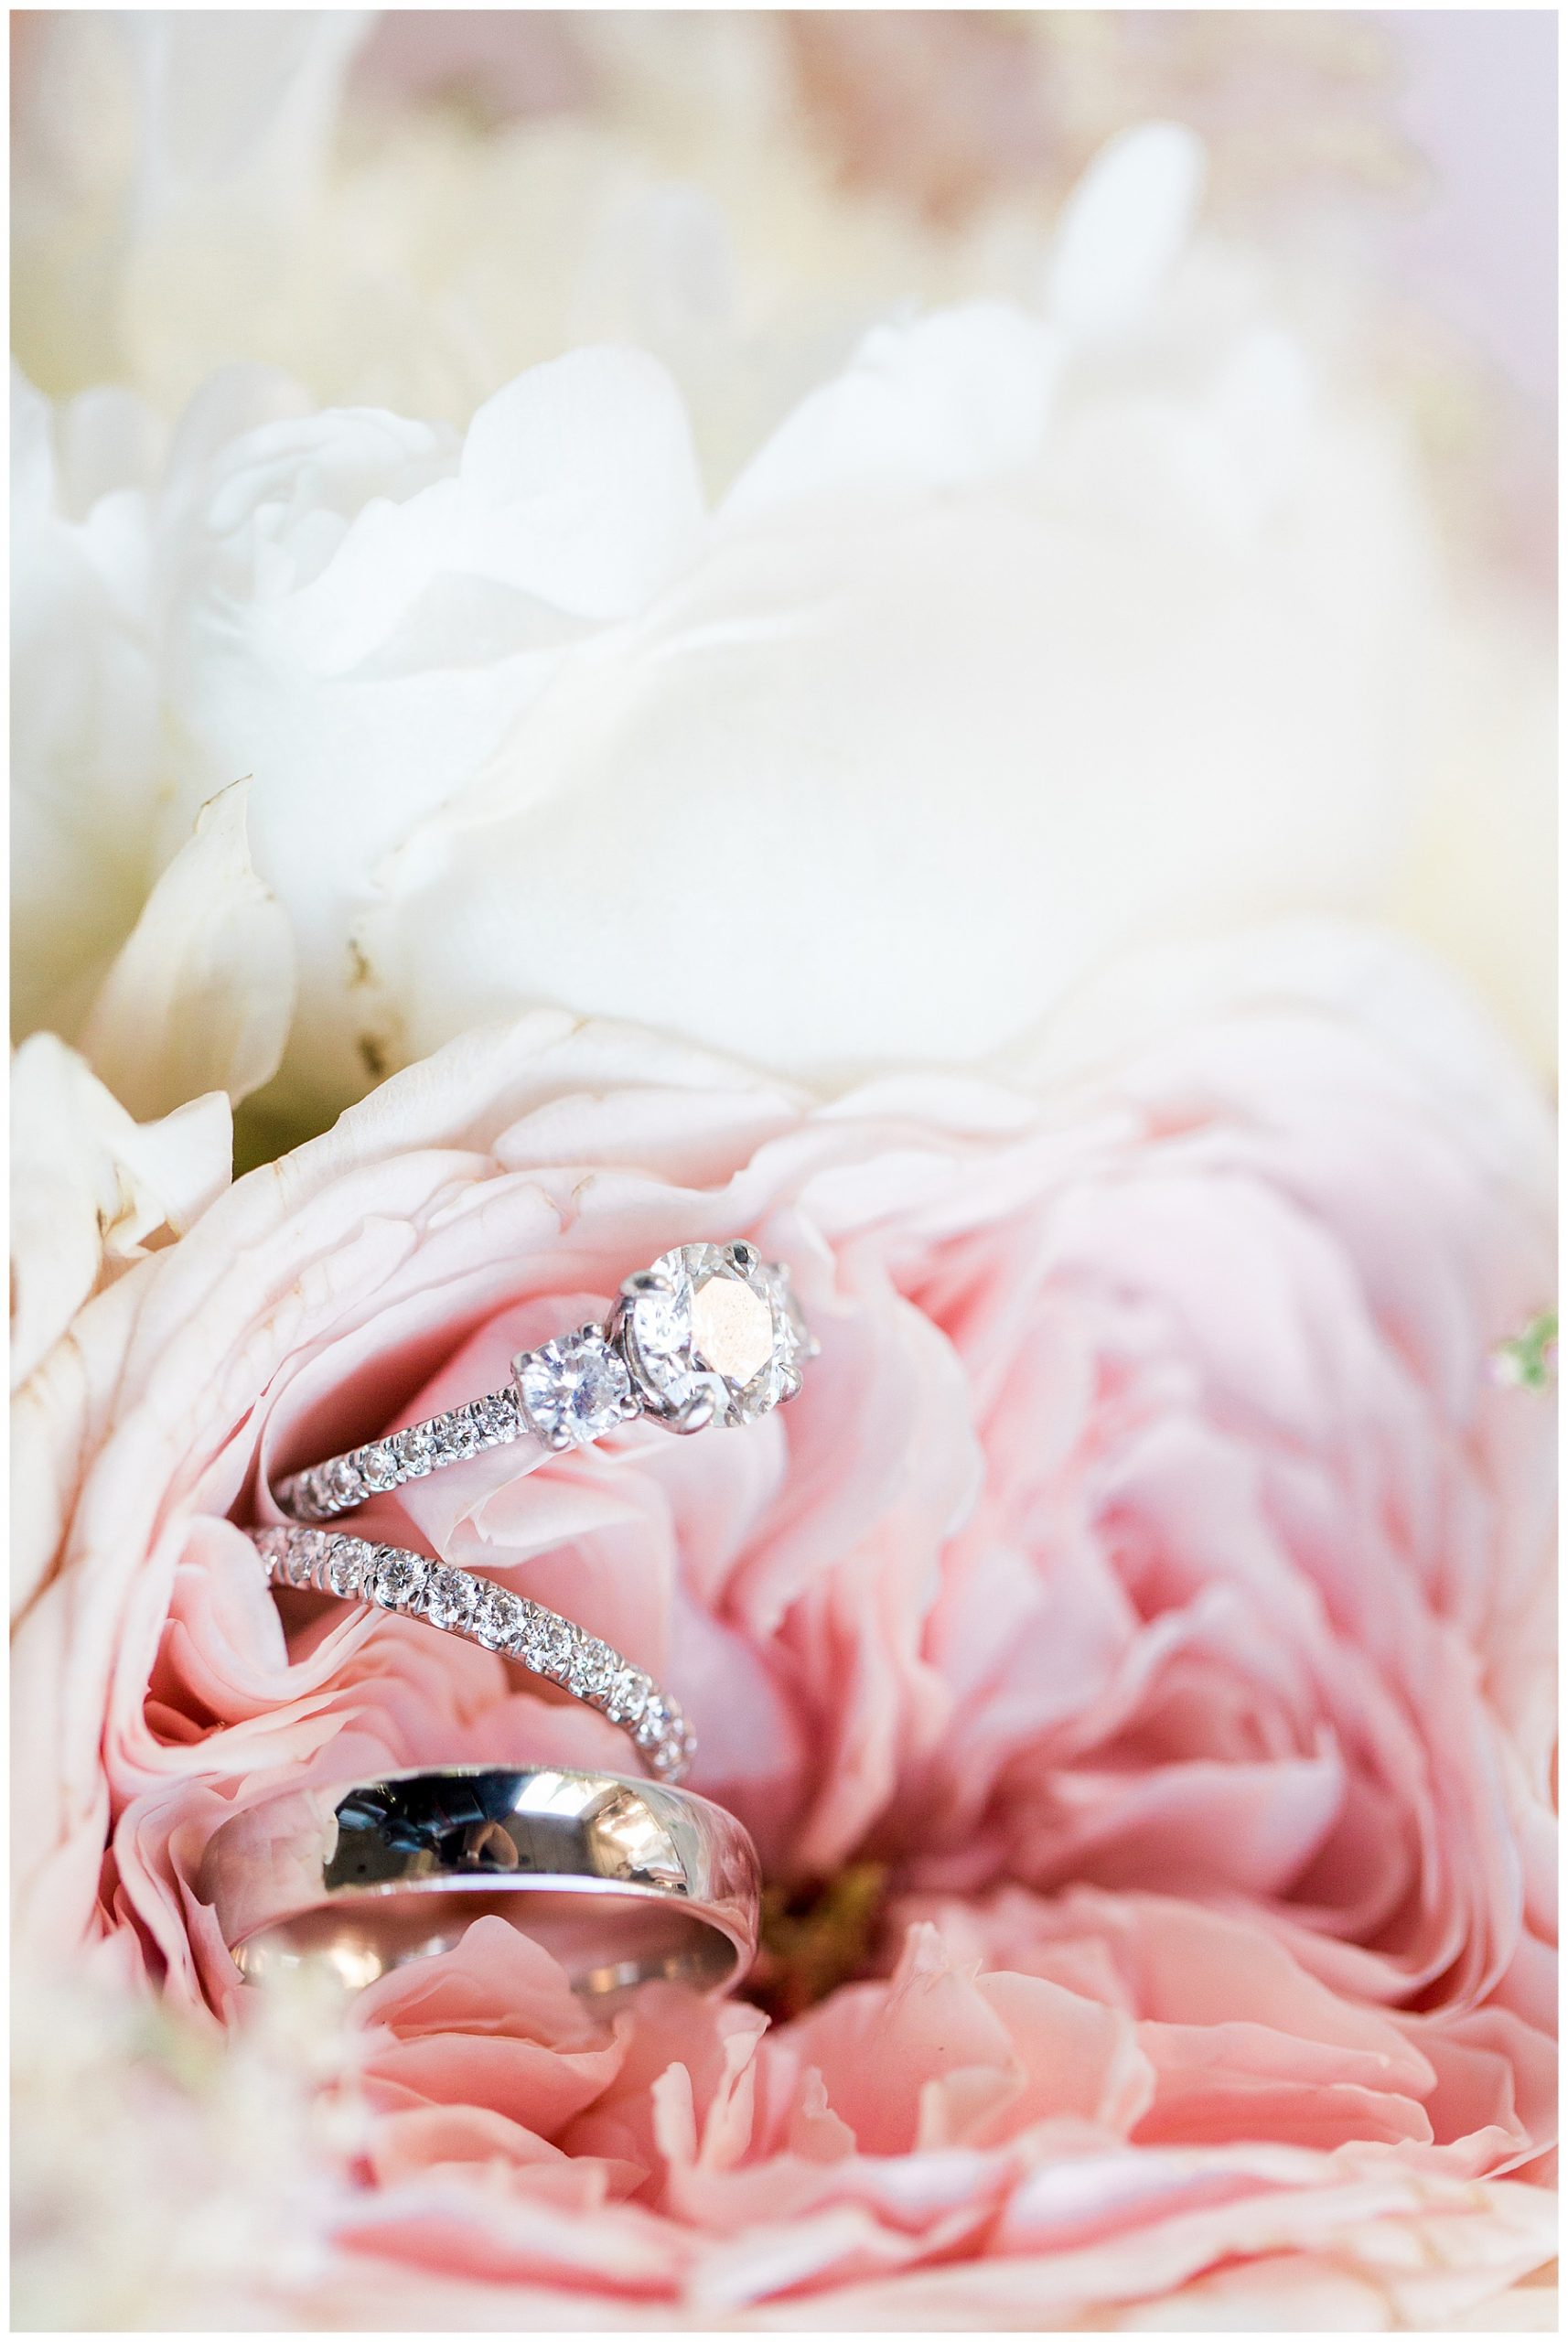 Bride and Groom Wedding Bands in Bridal Bouquet